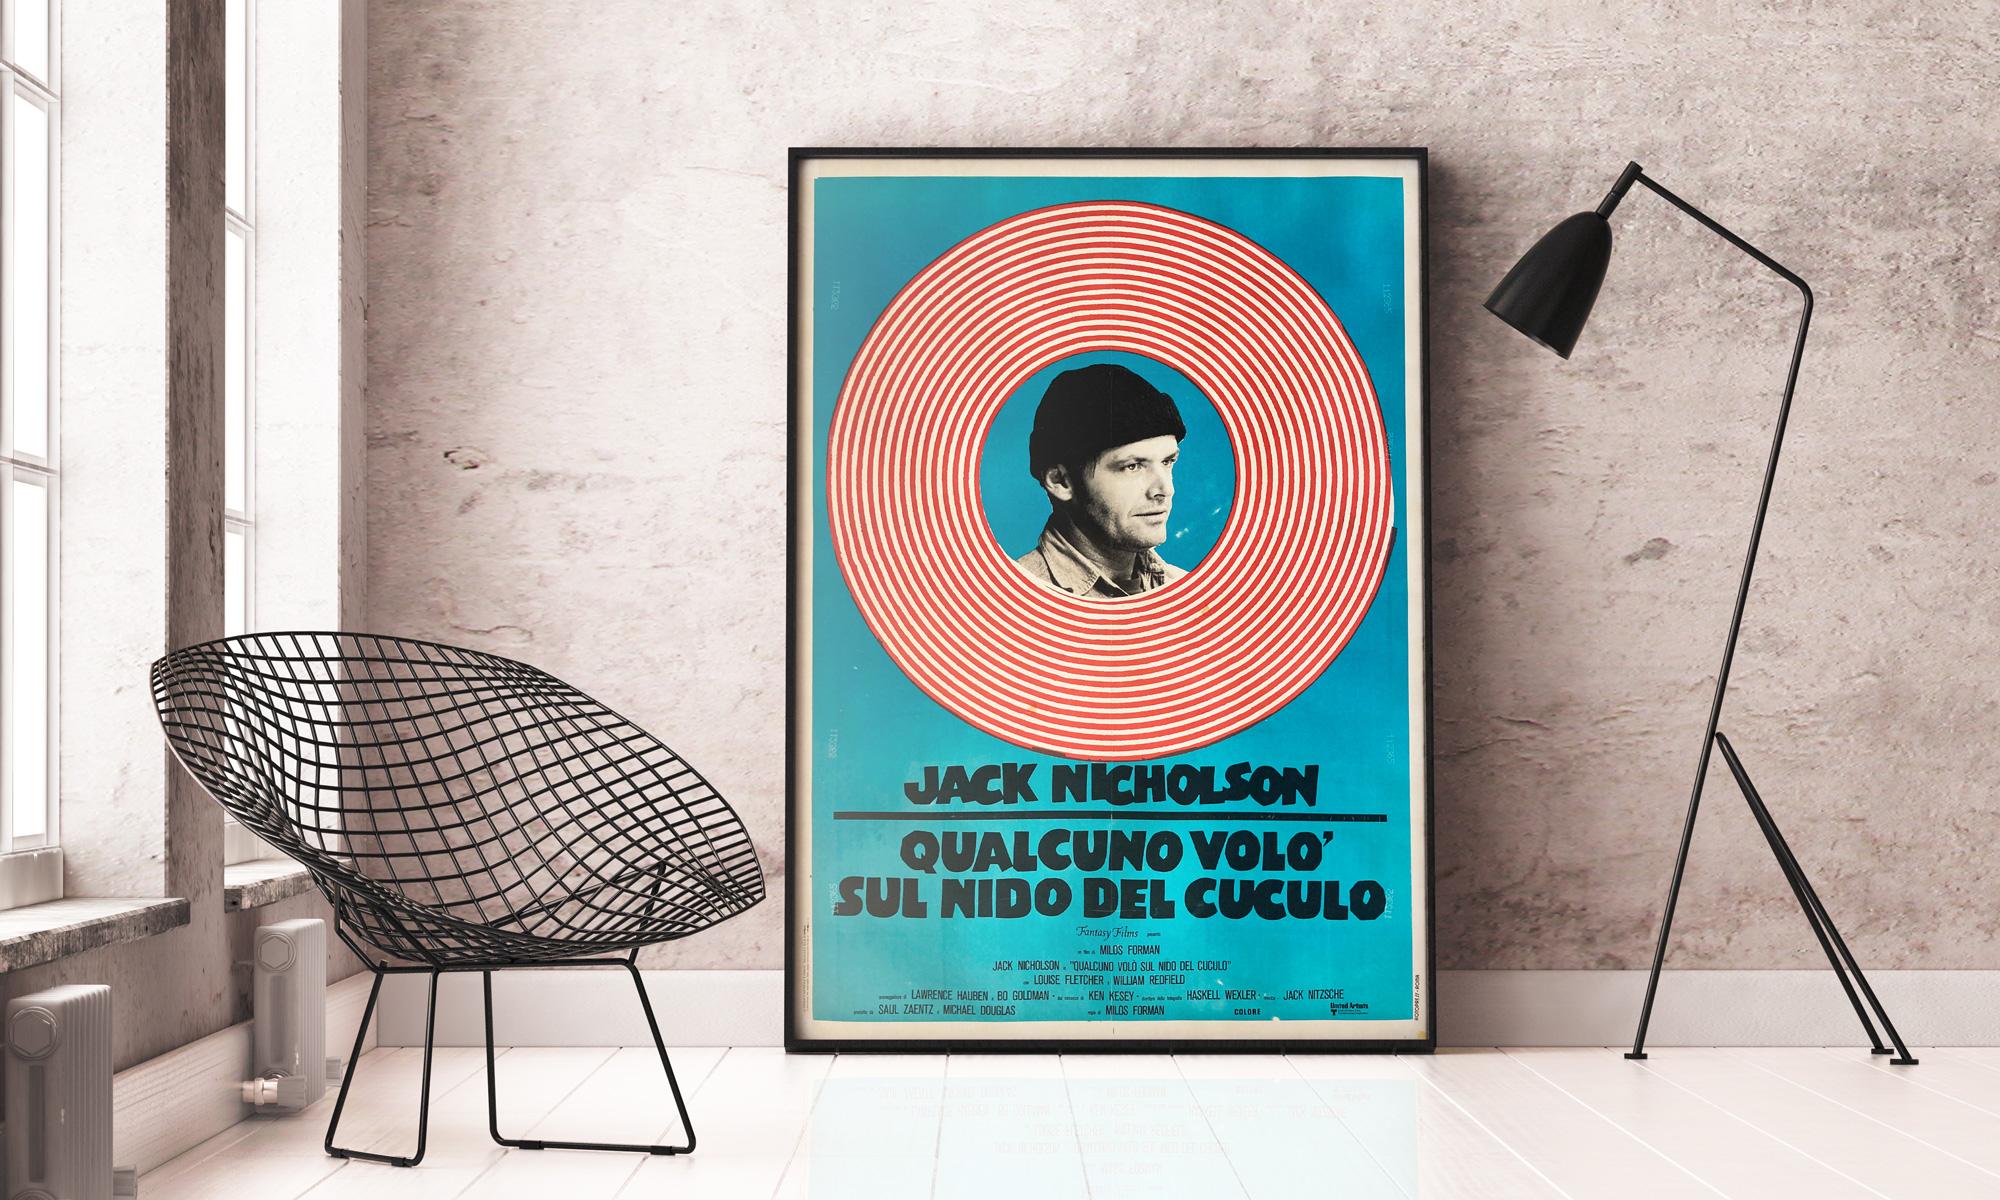 Jack Nicholson's character rightfully takes centre stage in the visually impressive Italian 70s re-release 2 sheet. The simple but effective artwork and size of the poster combine to deliver a serious style statement. A rare poster.

This vintage